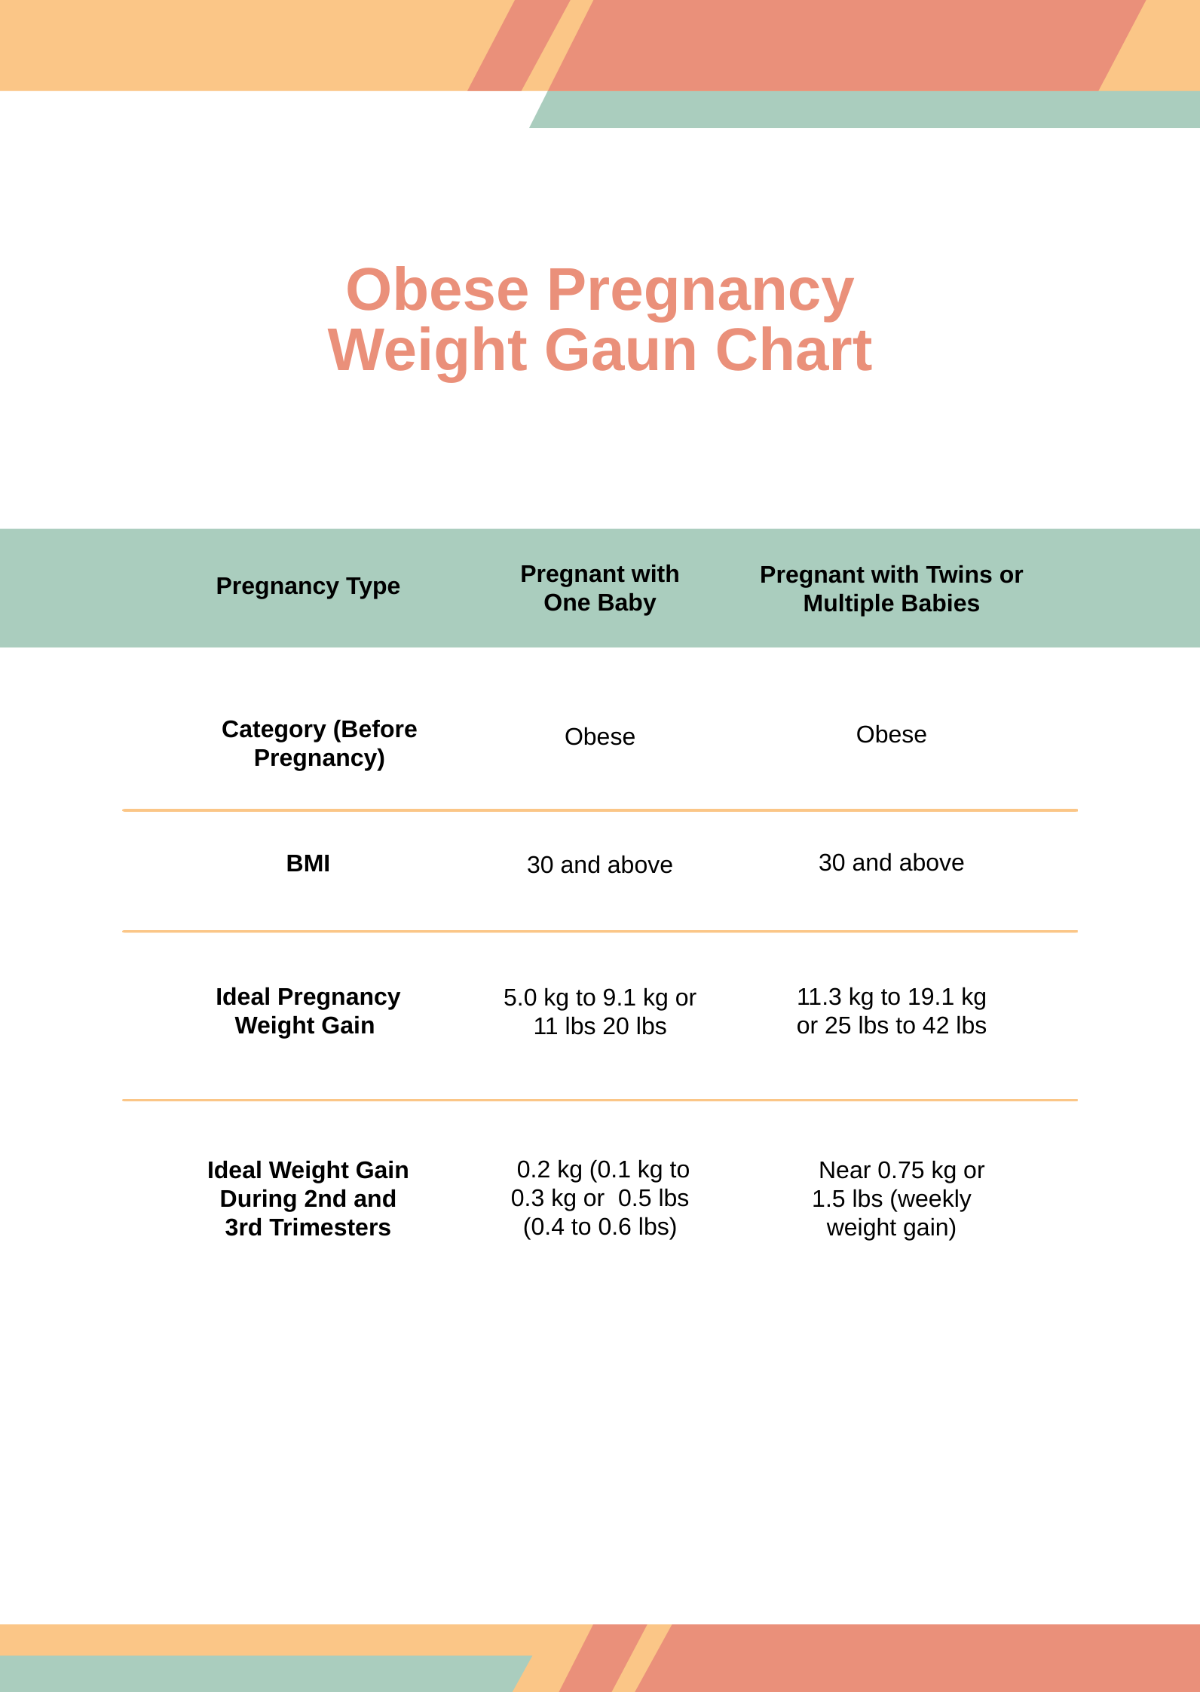 Obese Pregnancy Weight Gain Chart Template